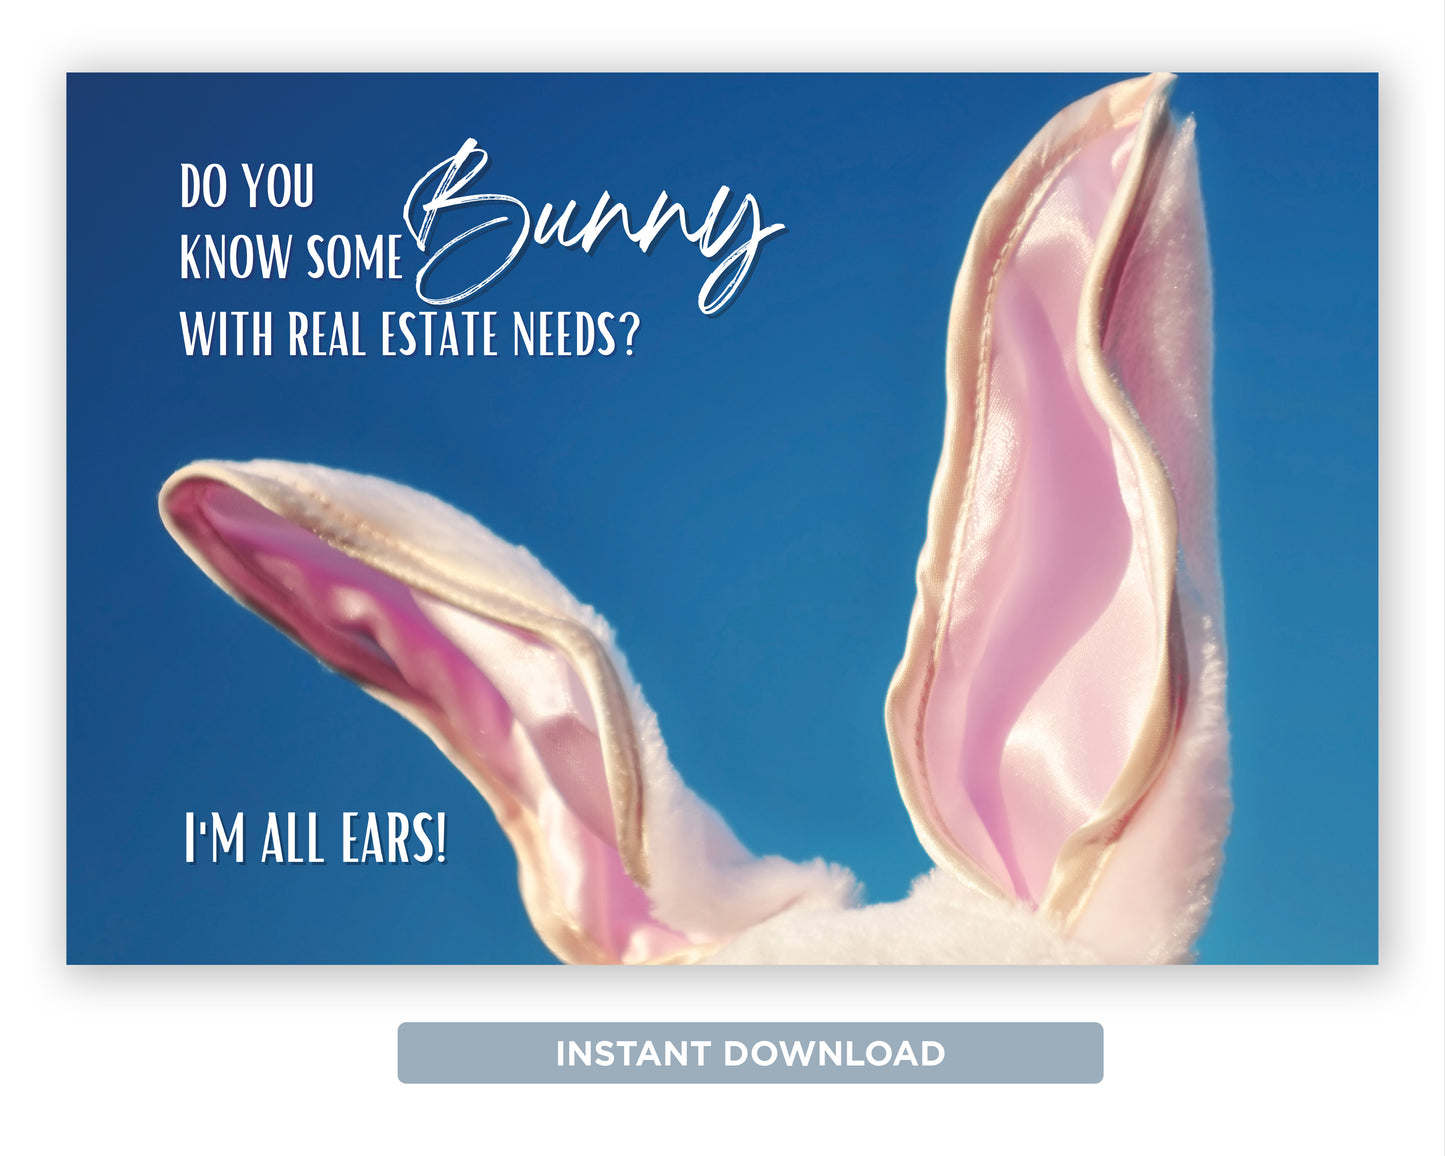 Do You Know Some Bunny With Real Estate Needs | Cute Real Estate Spring Postcard Download